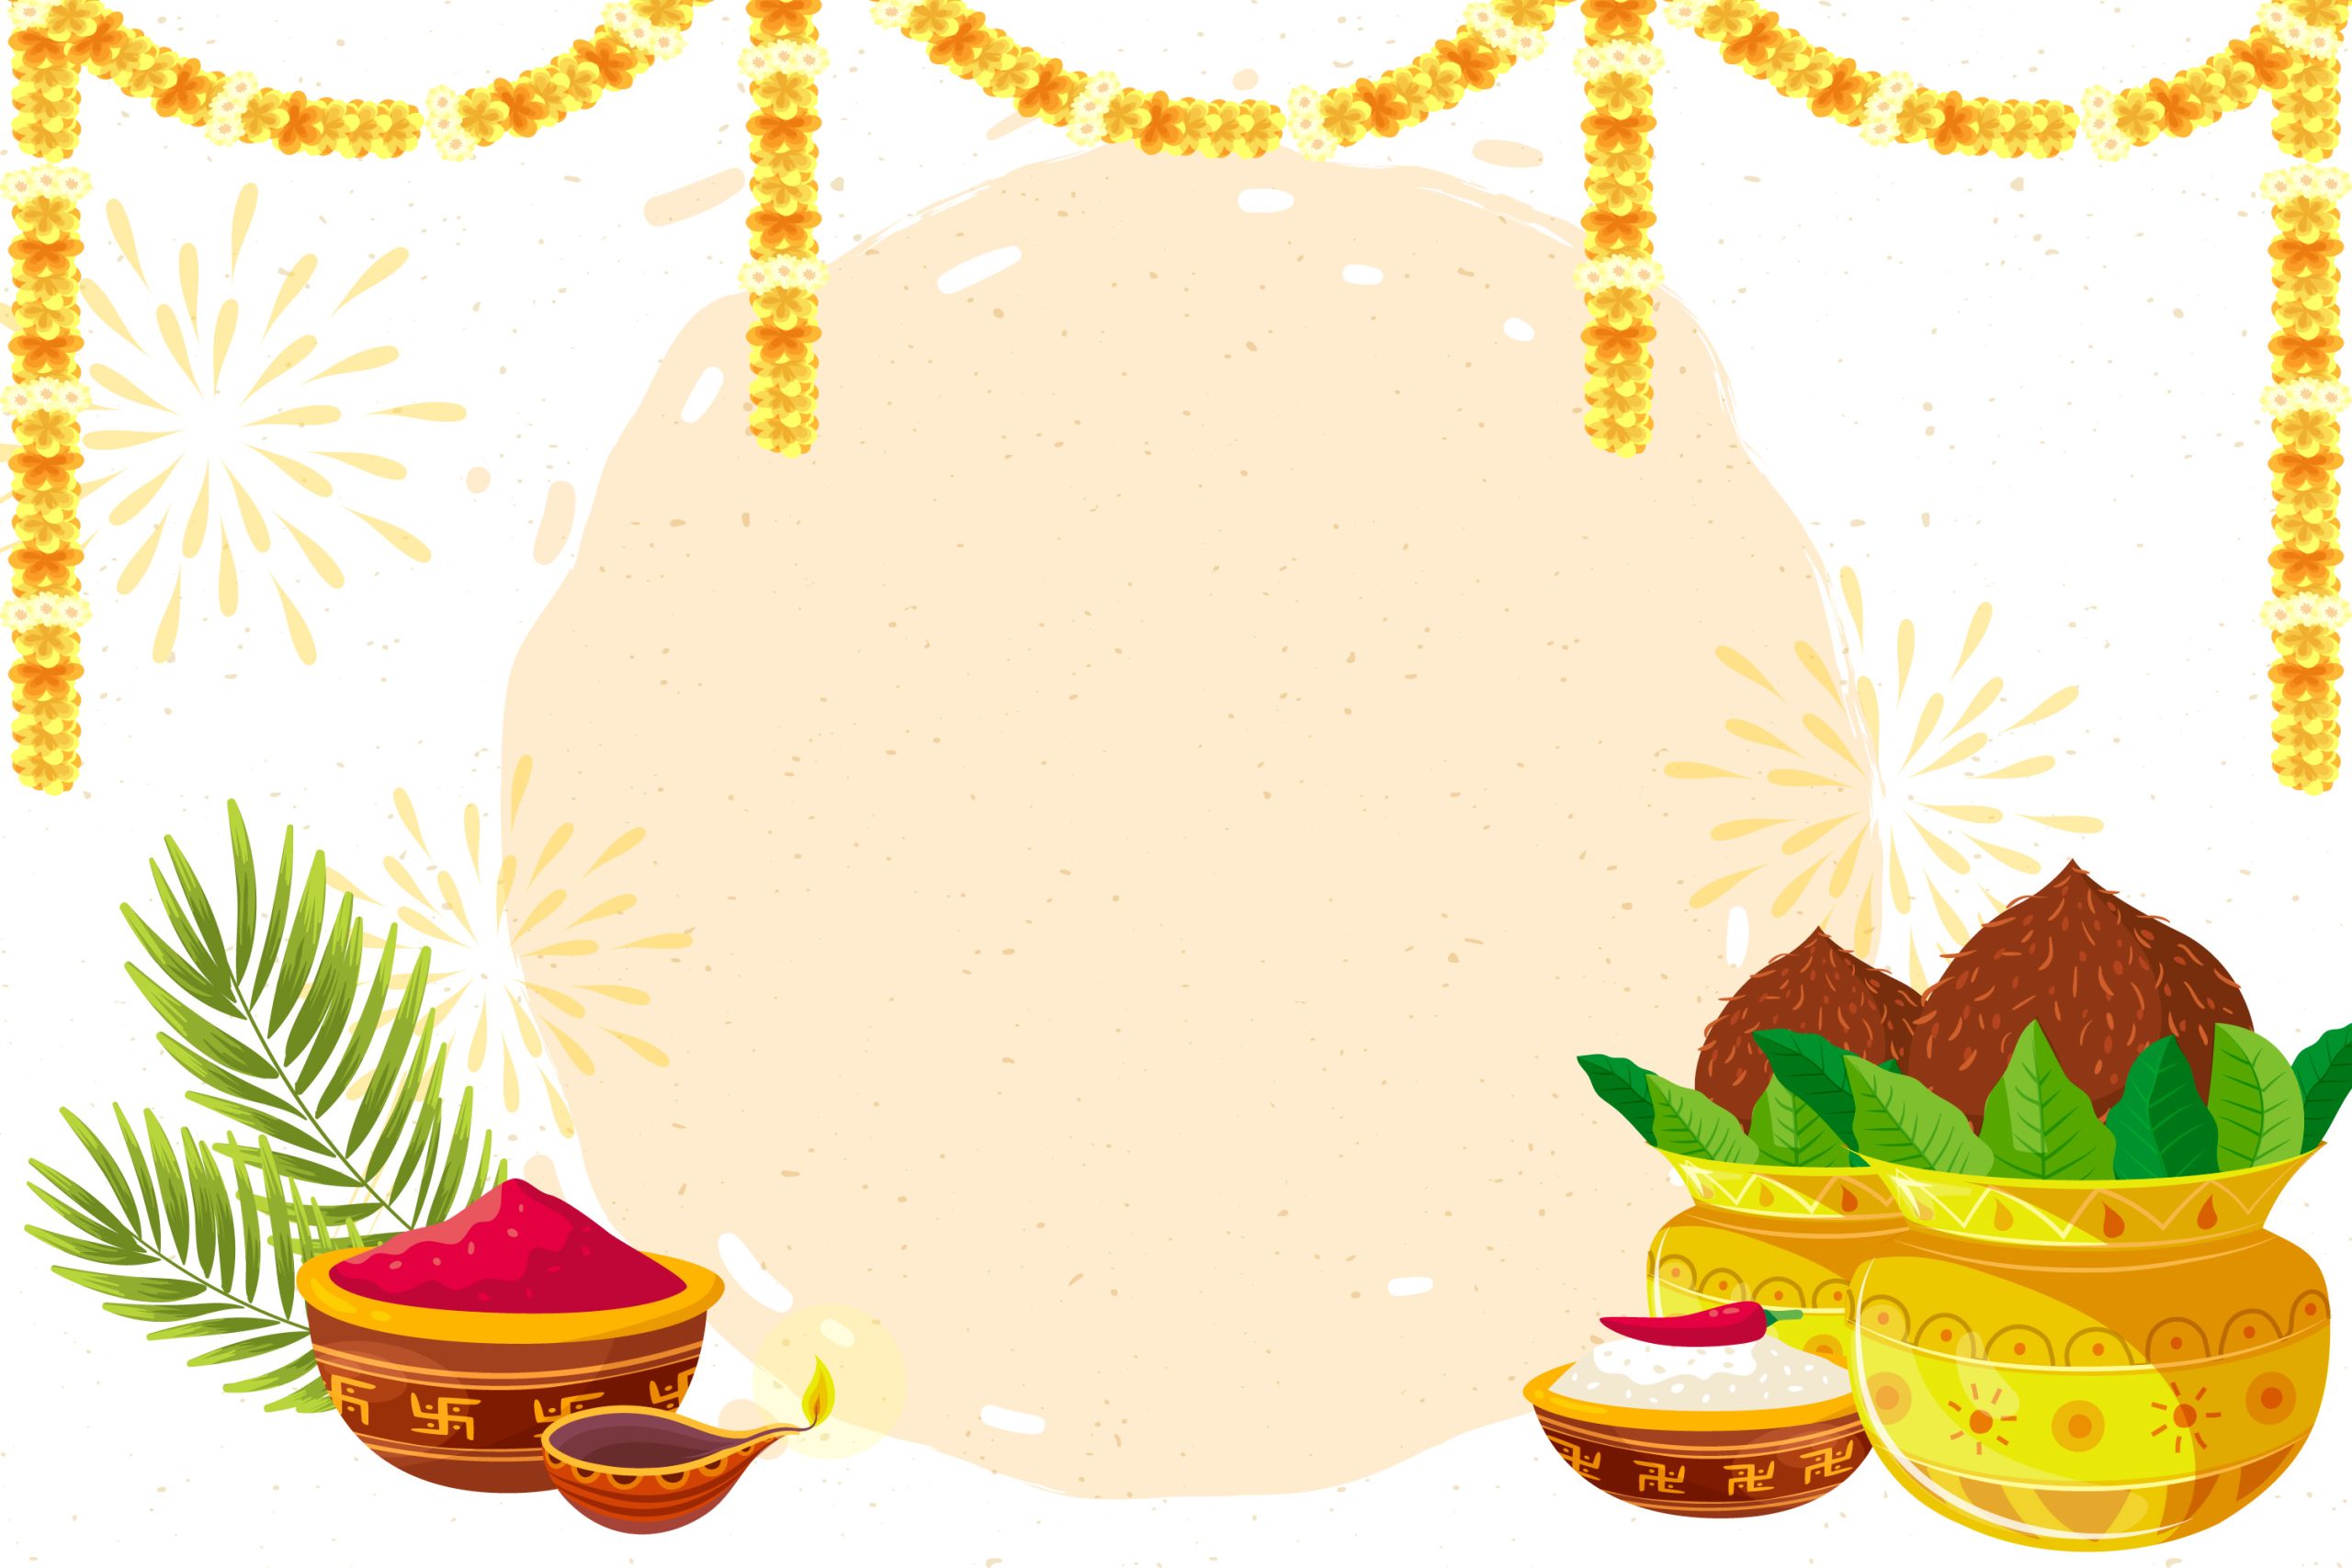 DIY craft ideas for making your own Navratri decorations